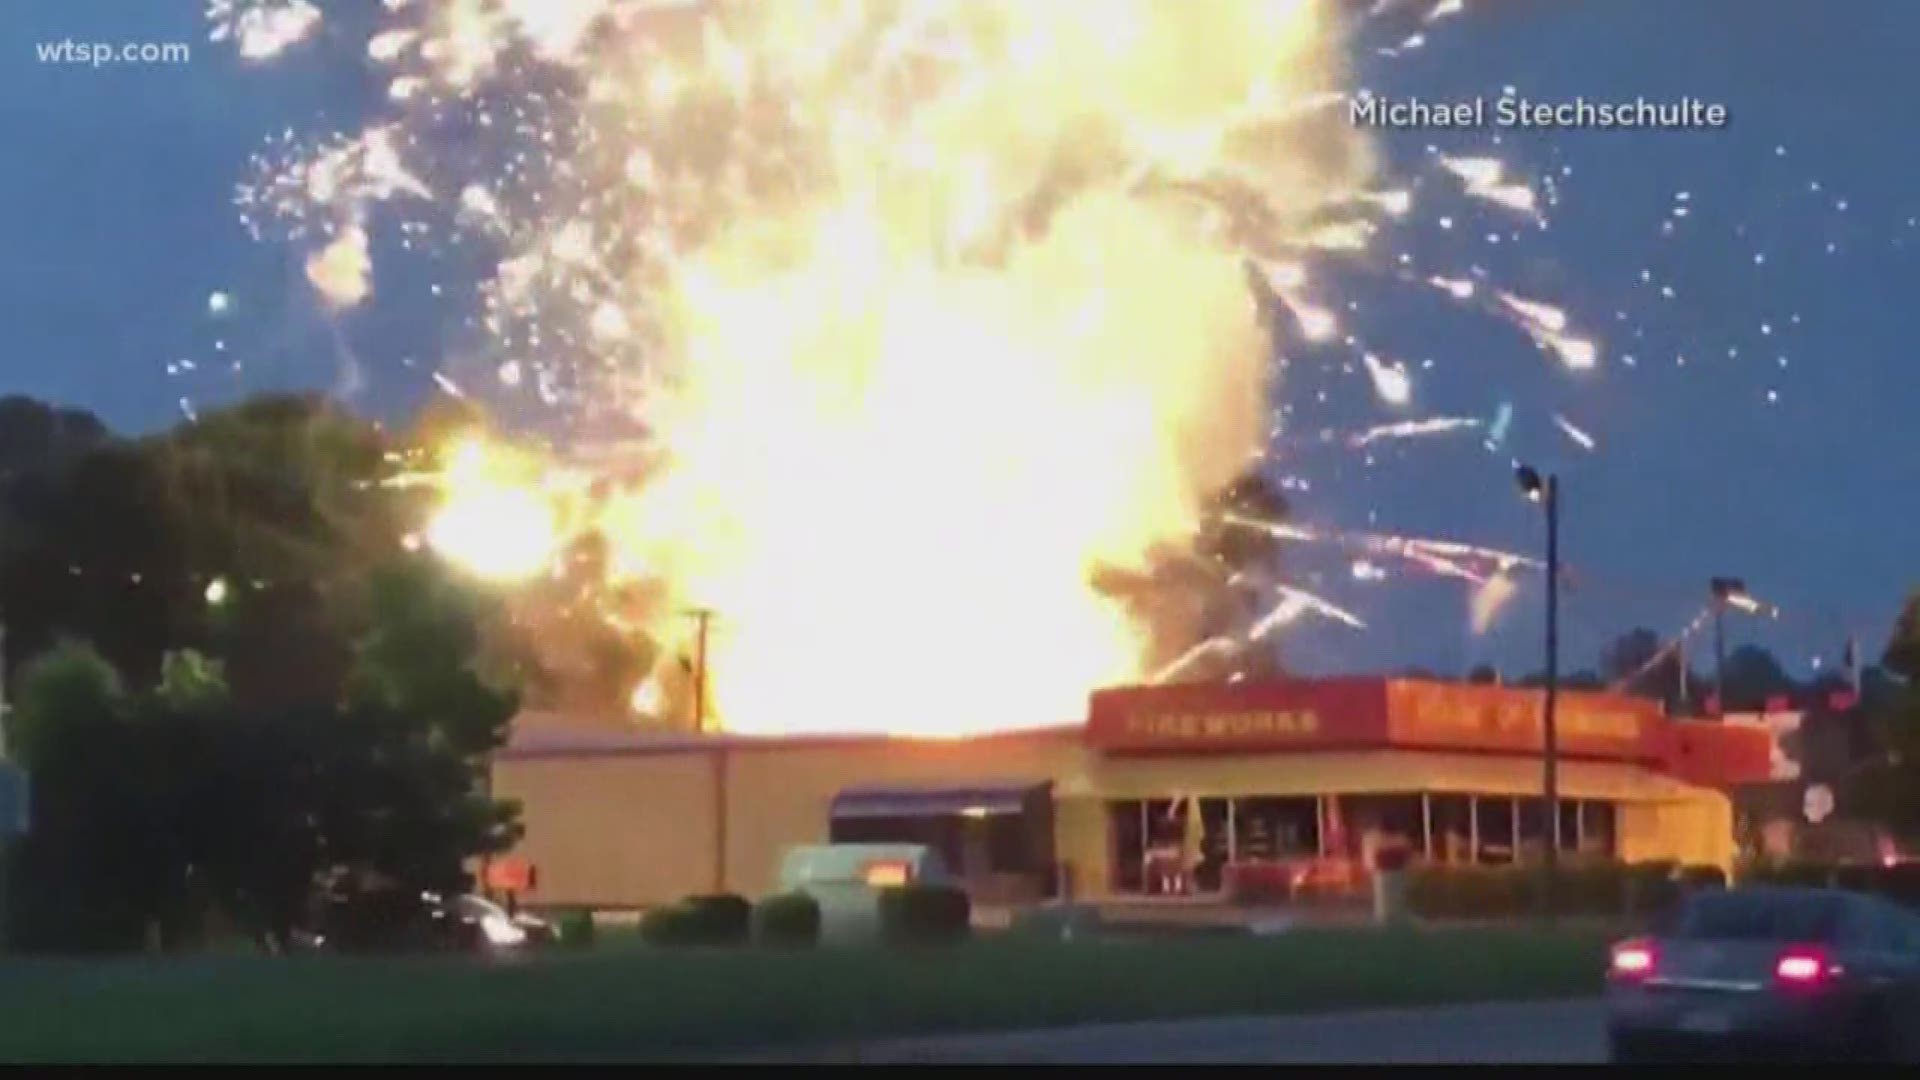 The cause of the fire at the South Carolina fireworks store is unknown. Meanwhile, fireworks are also being blamed for a brush fire near the baseball field where the Mets' minor league team plays.